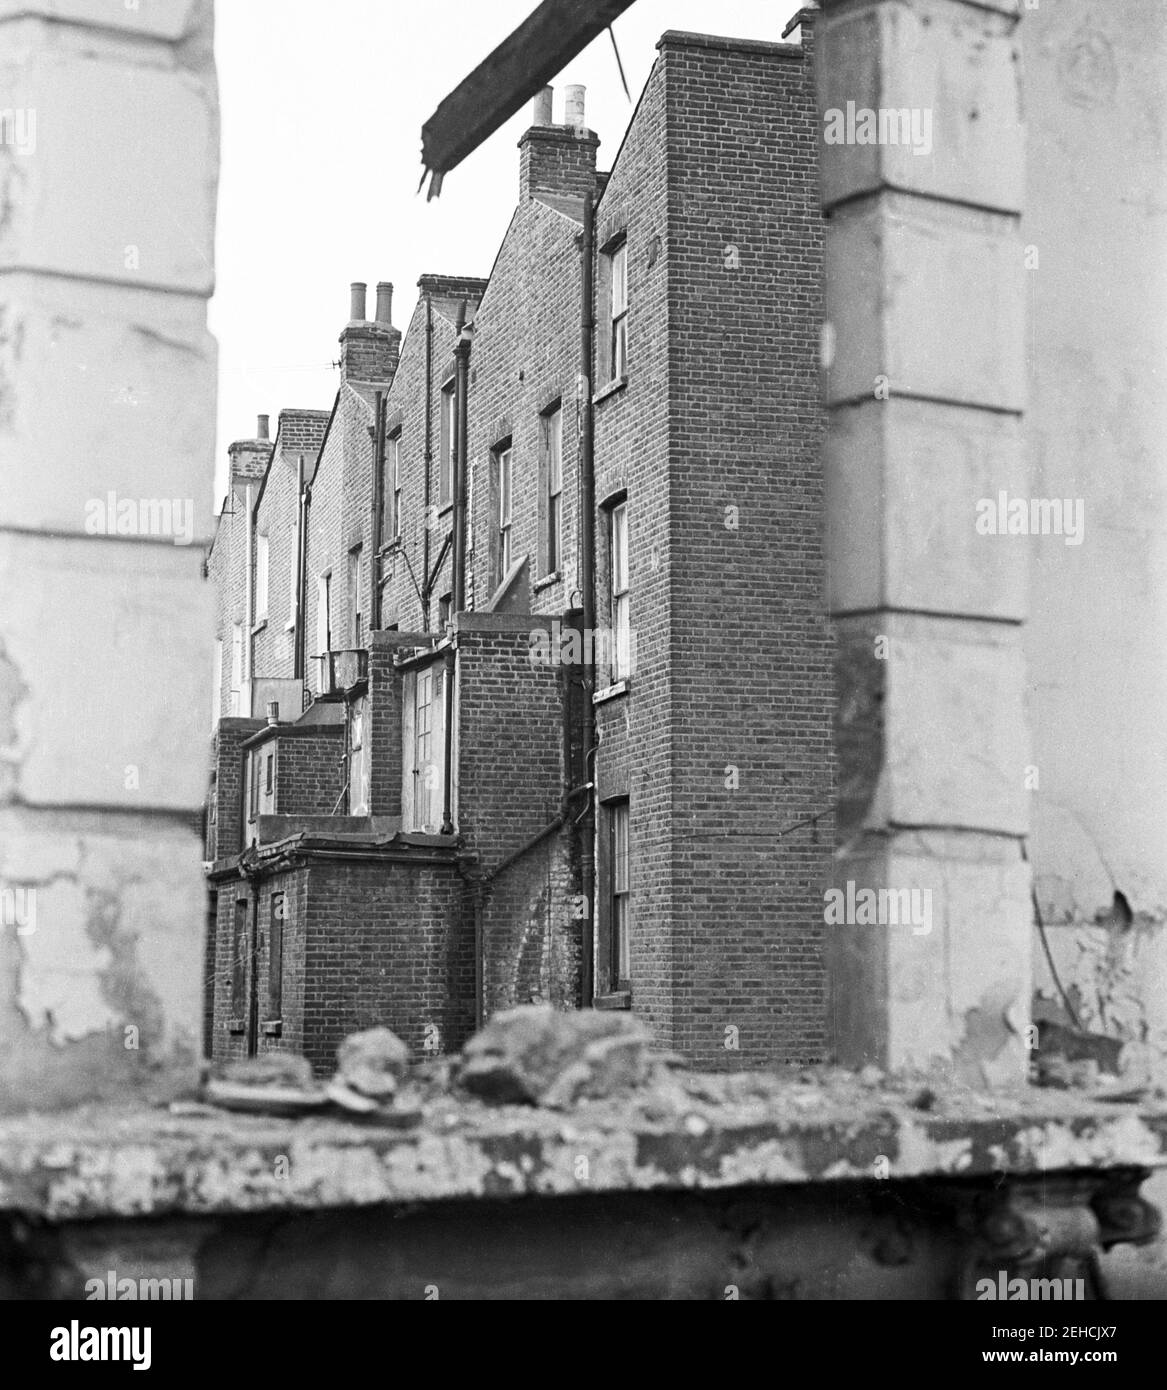 UK, West London, Notting Hill, 1973. Rundown & dilapidated large four-story houses are starting to be restored and redecorated. Stock Photo